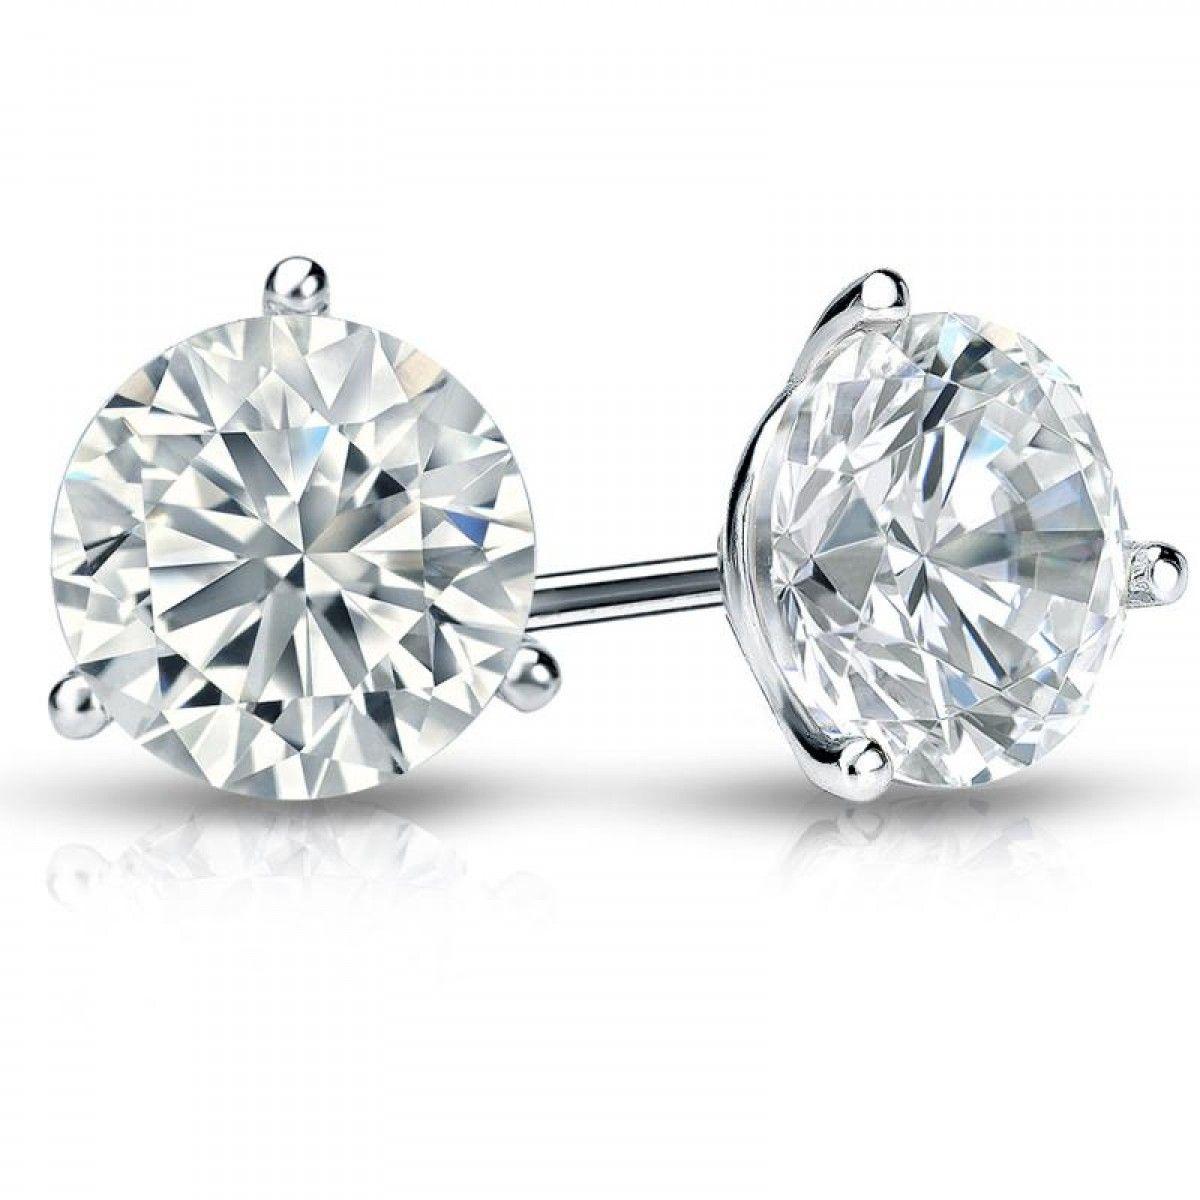 GIA Certified 5.86 Carat Diamond Stud Earrings in 18K White Gold

Description:

Diamond Stud earrings
18K white gold earrings set in four prong mounting

Diamond specifications:

5.86 Carats Of Diamonds two round cut diamonds, set in three prong